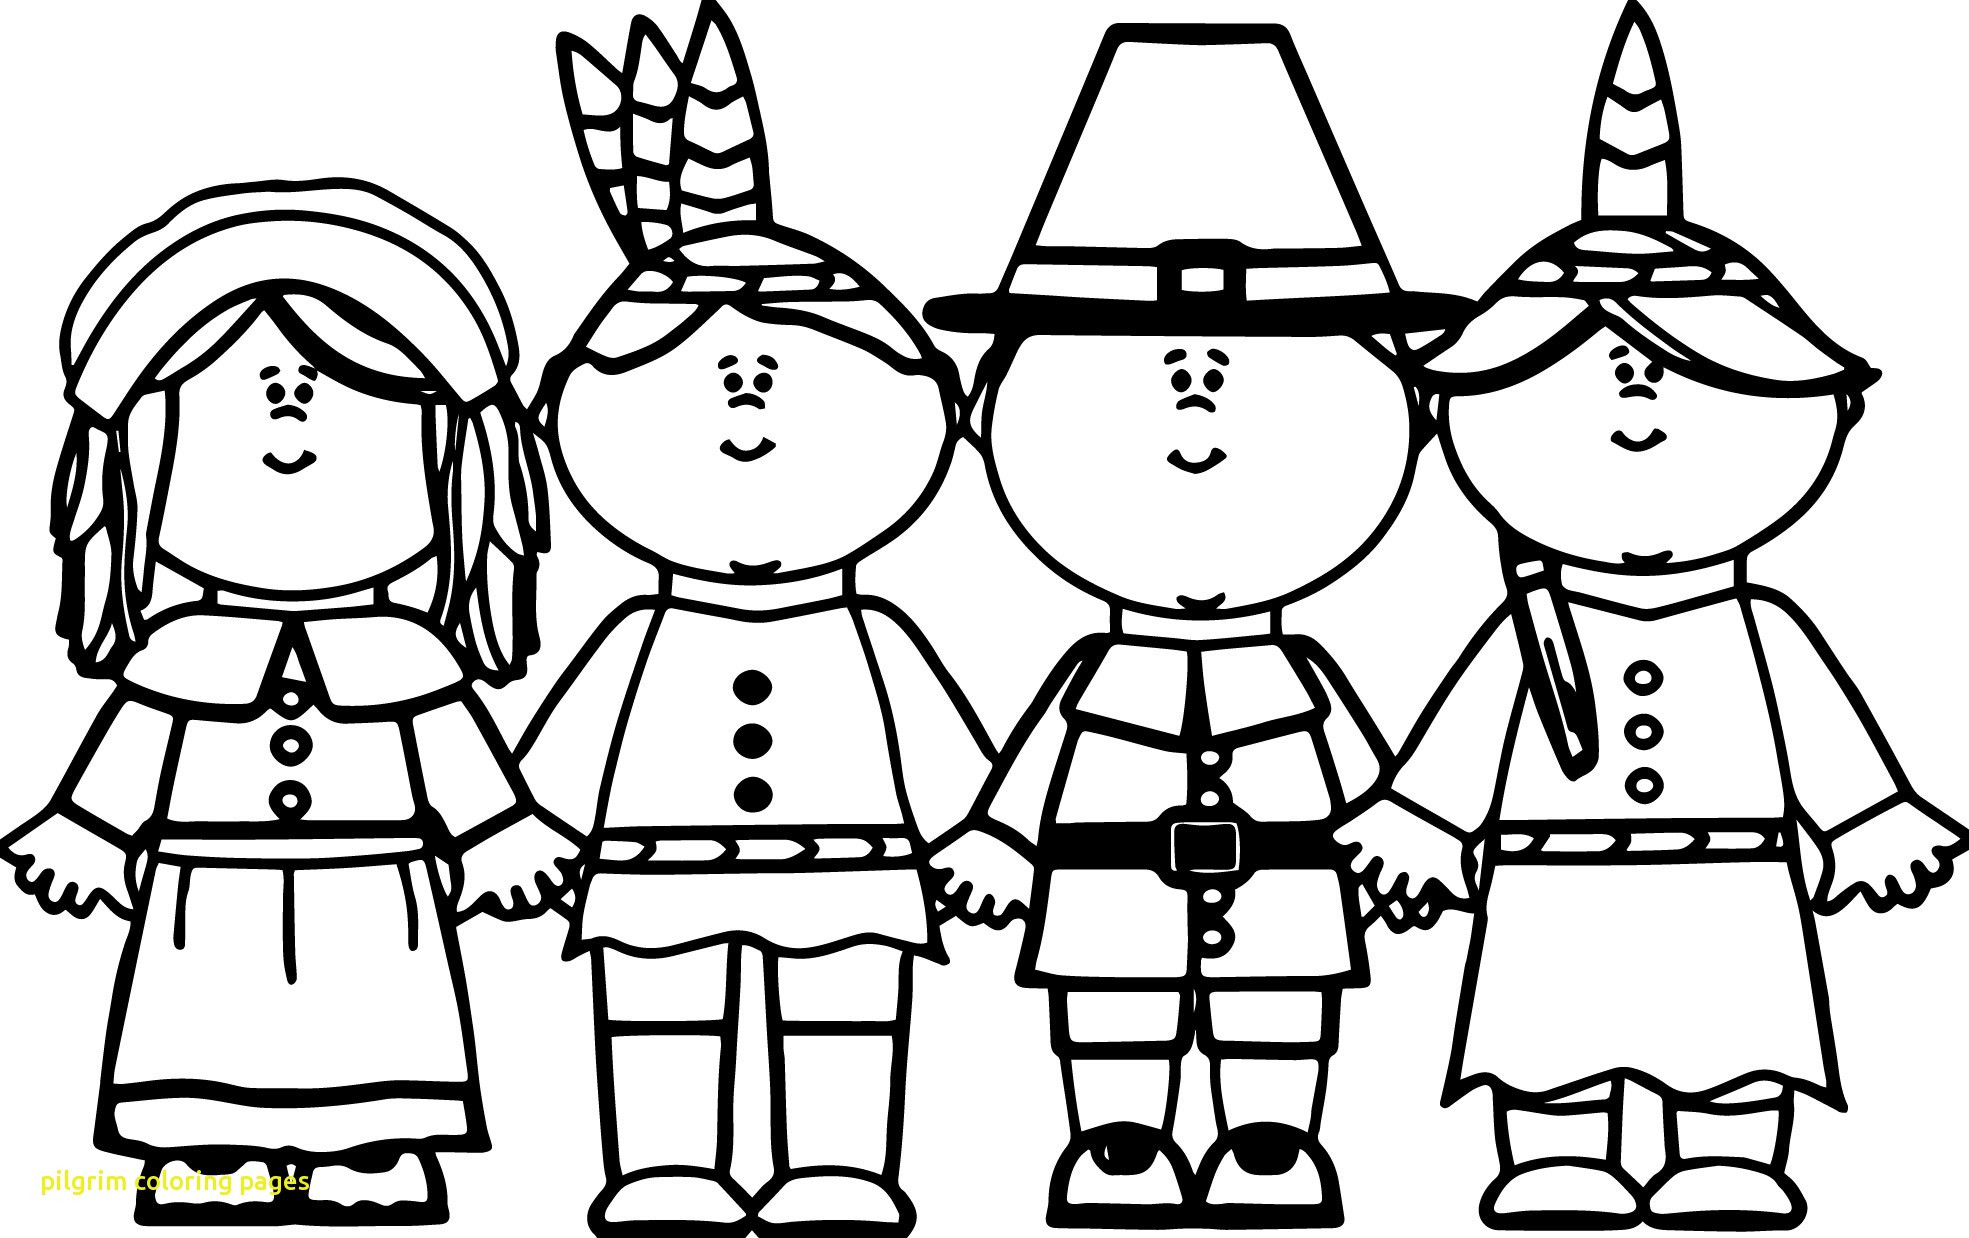 pilgrim-coloring-pages-at-getcolorings-free-printable-colorings-pages-to-print-and-color